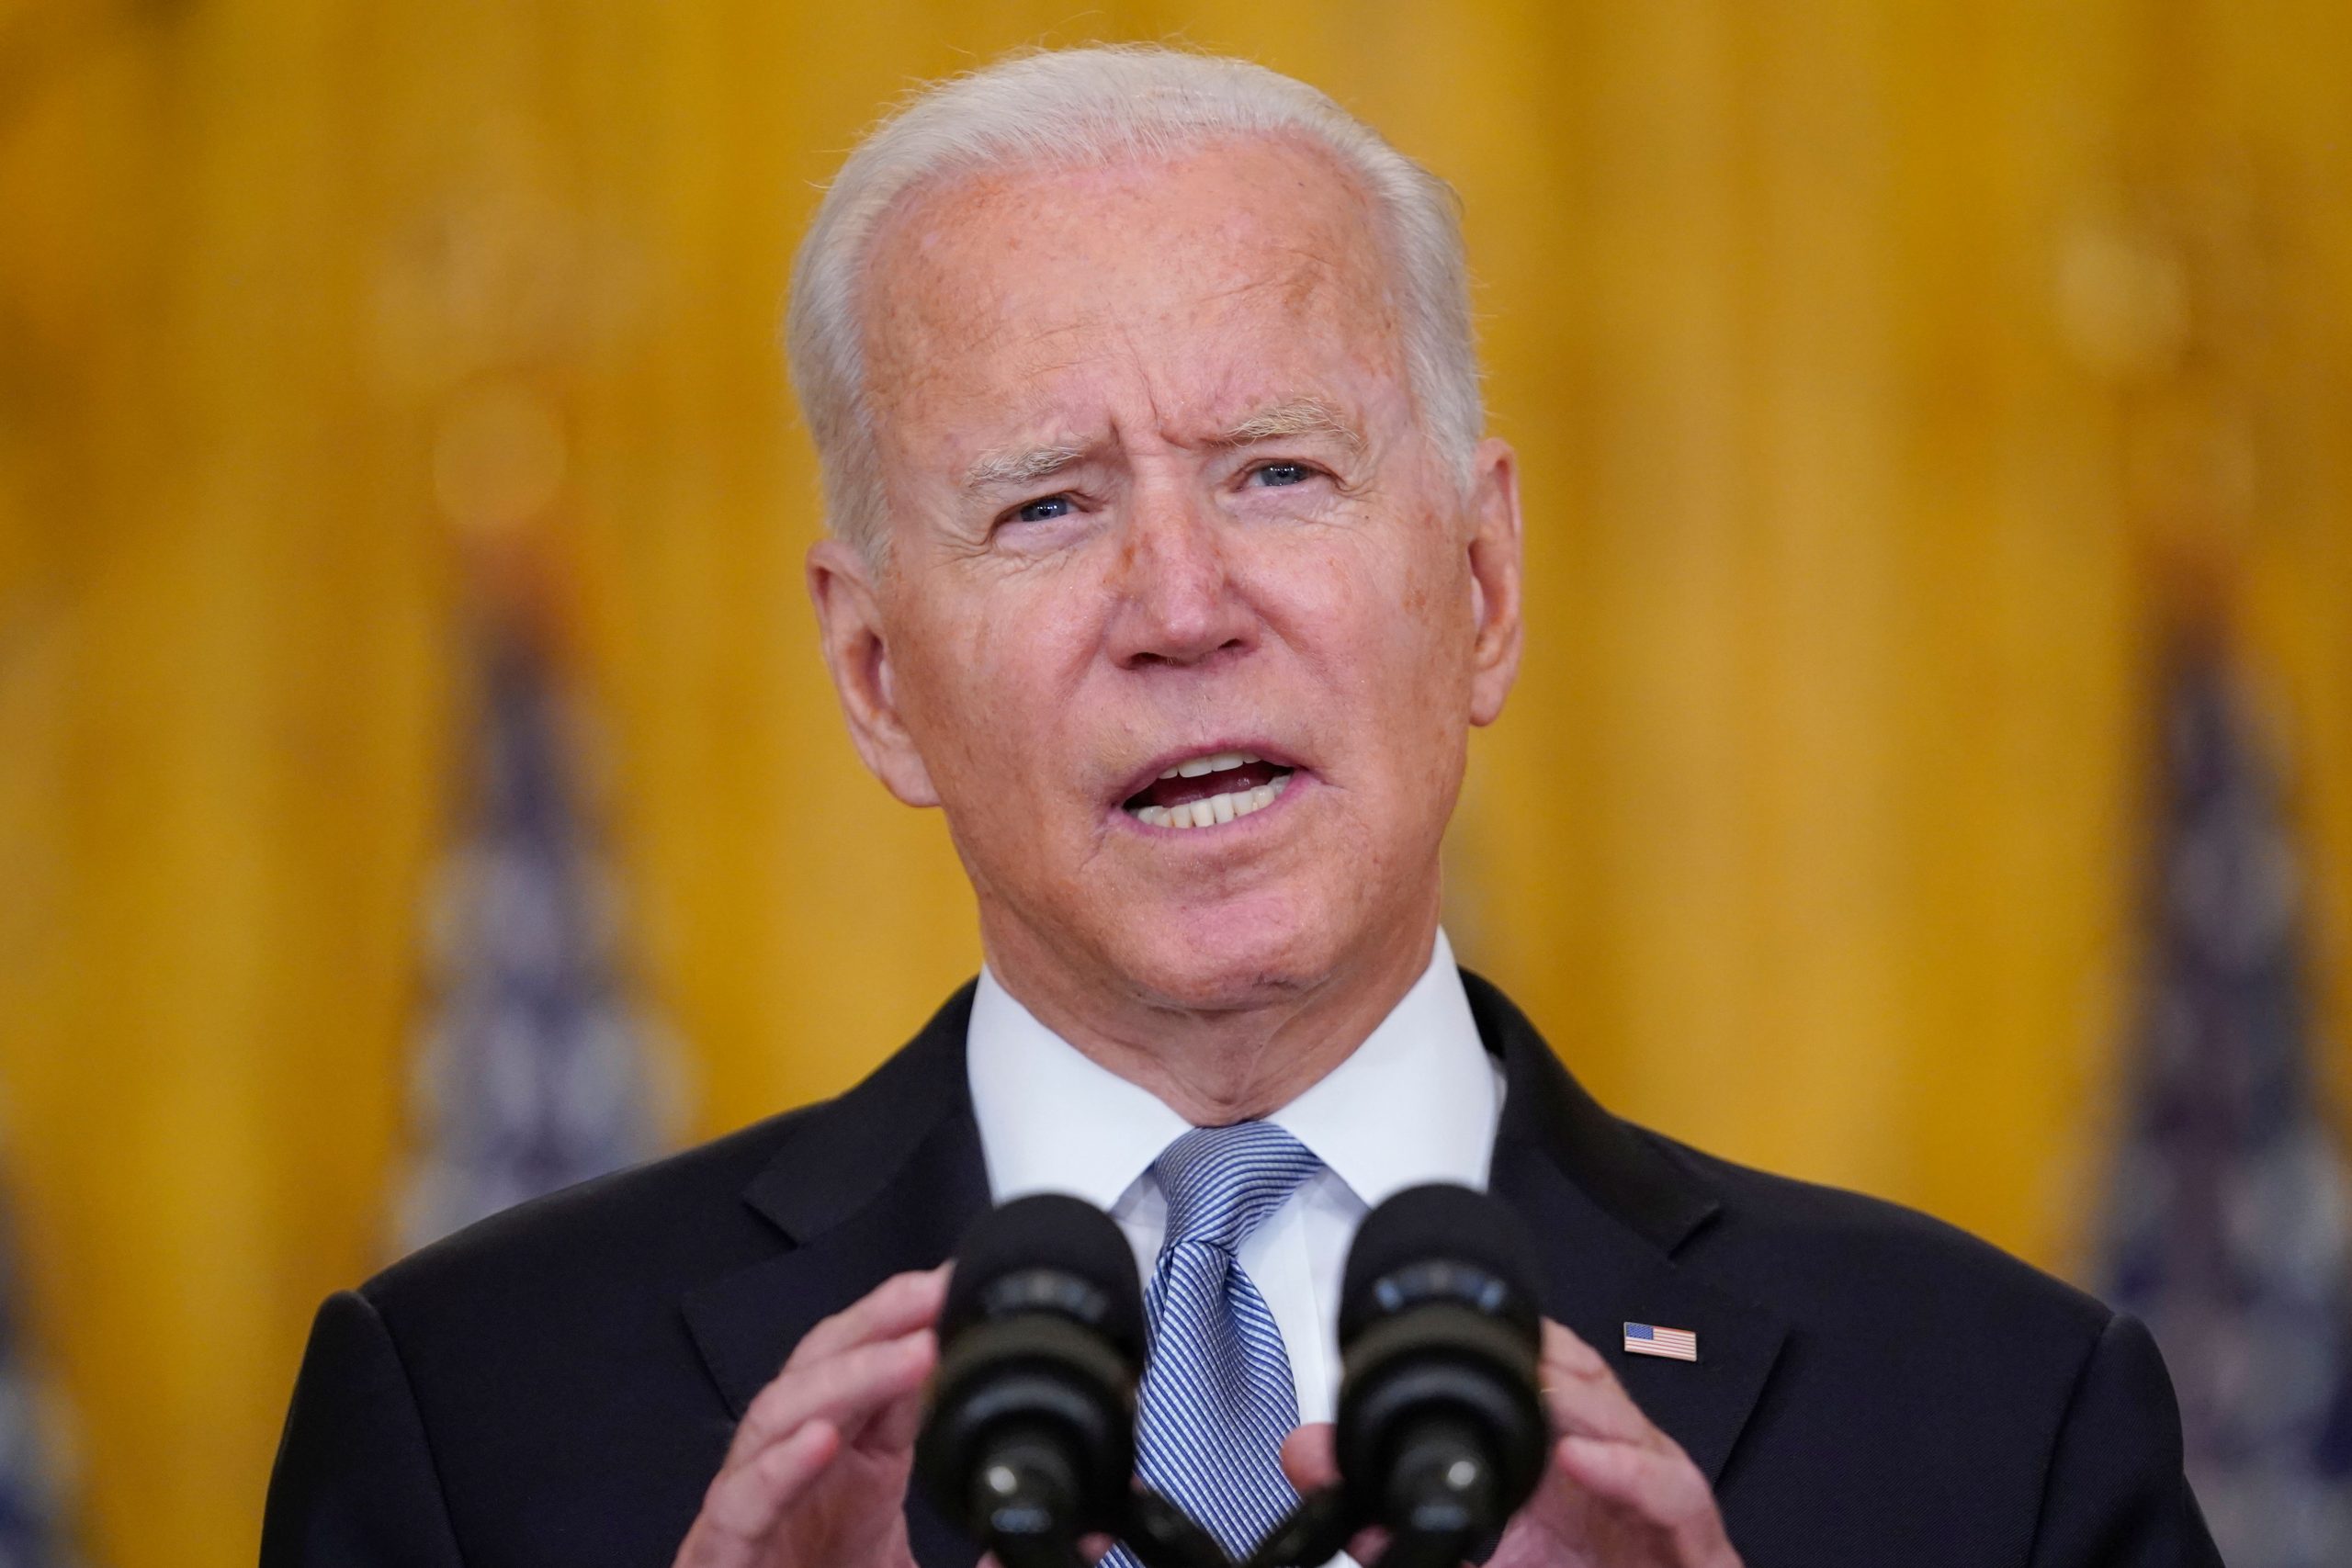 President Biden pledges federal support ‘as long as it takes’ to areas hit by Ida